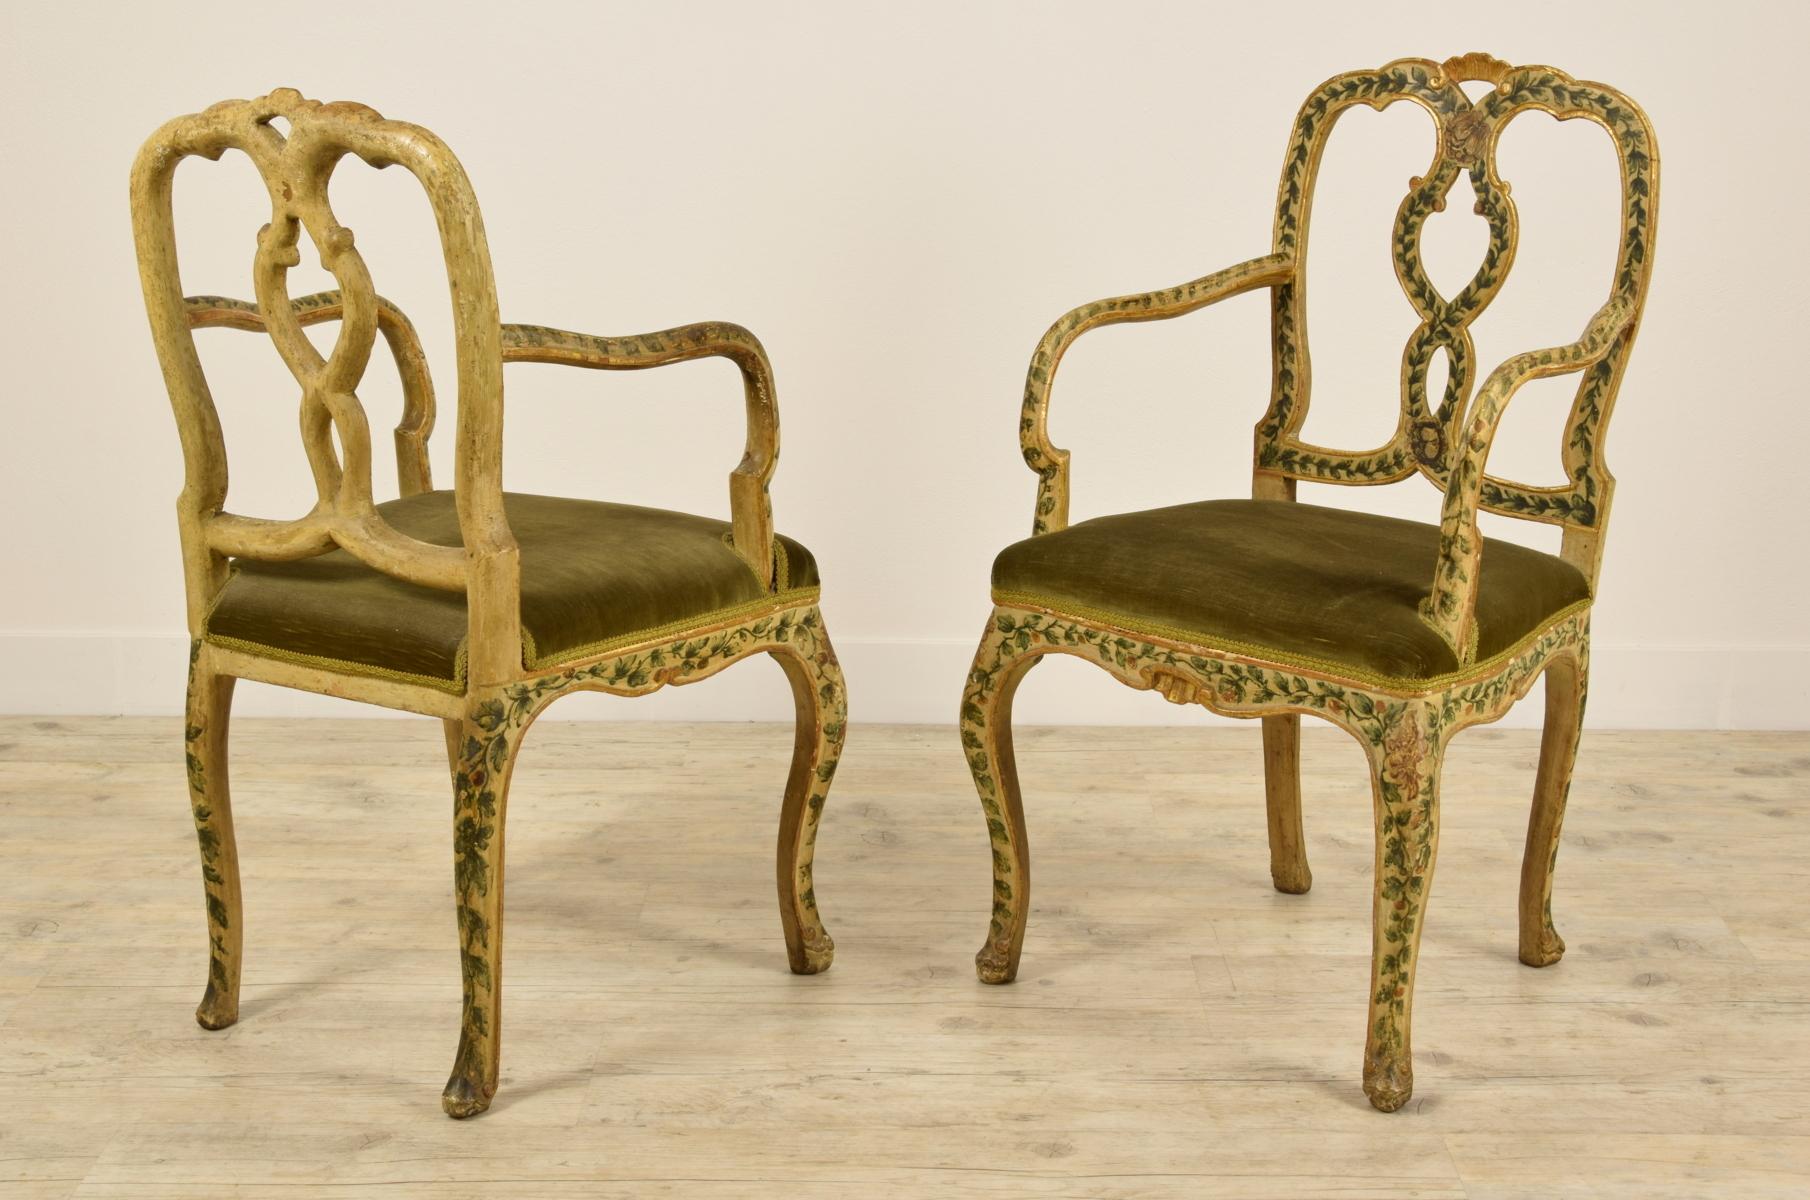 Italian 18th Century, Pair of Venetian Lacquered and Giltwood Armchairs